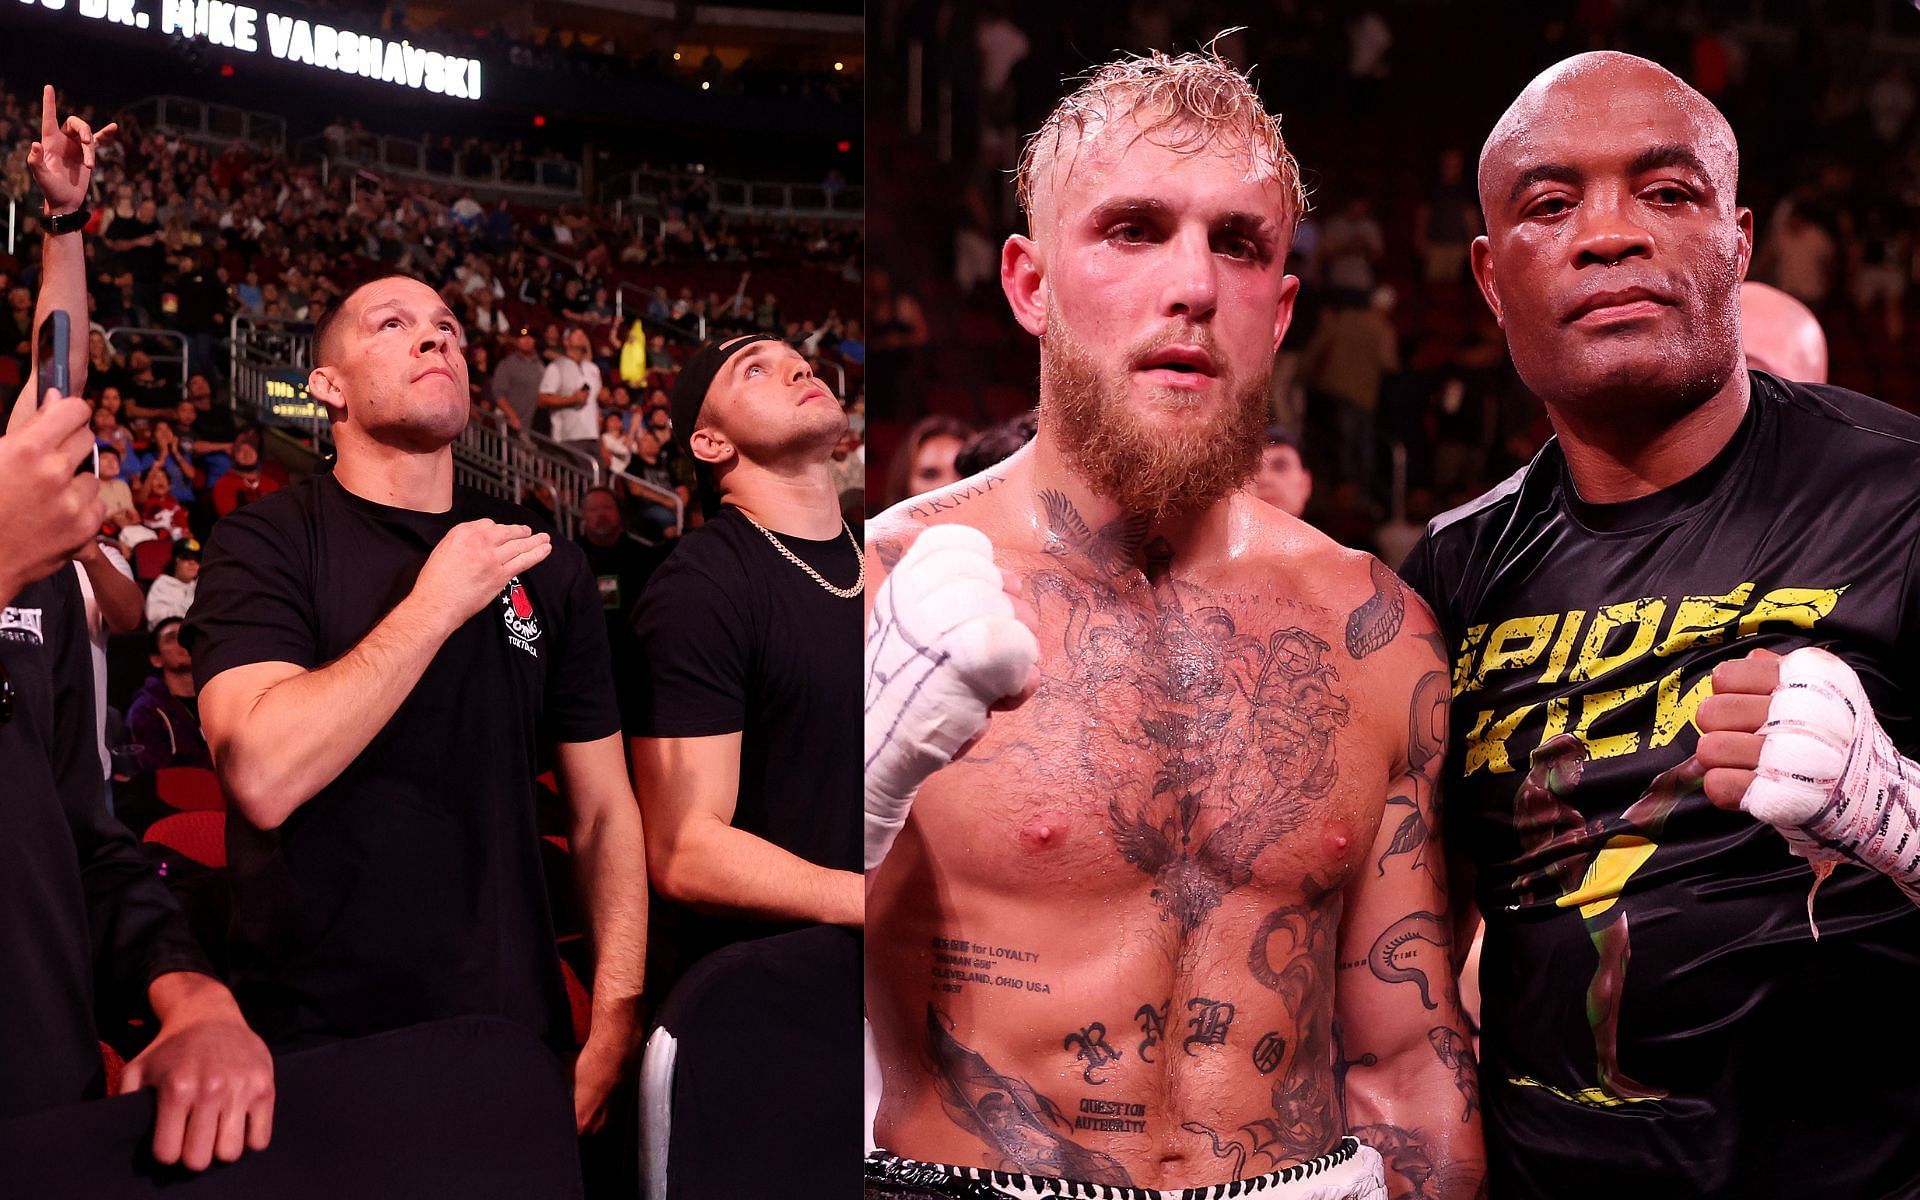 Nate Diaz in the crowd at Paul vs. Silca  (left) and Jake Paul with Anderson Silva (right) (Image credits Getty Images)